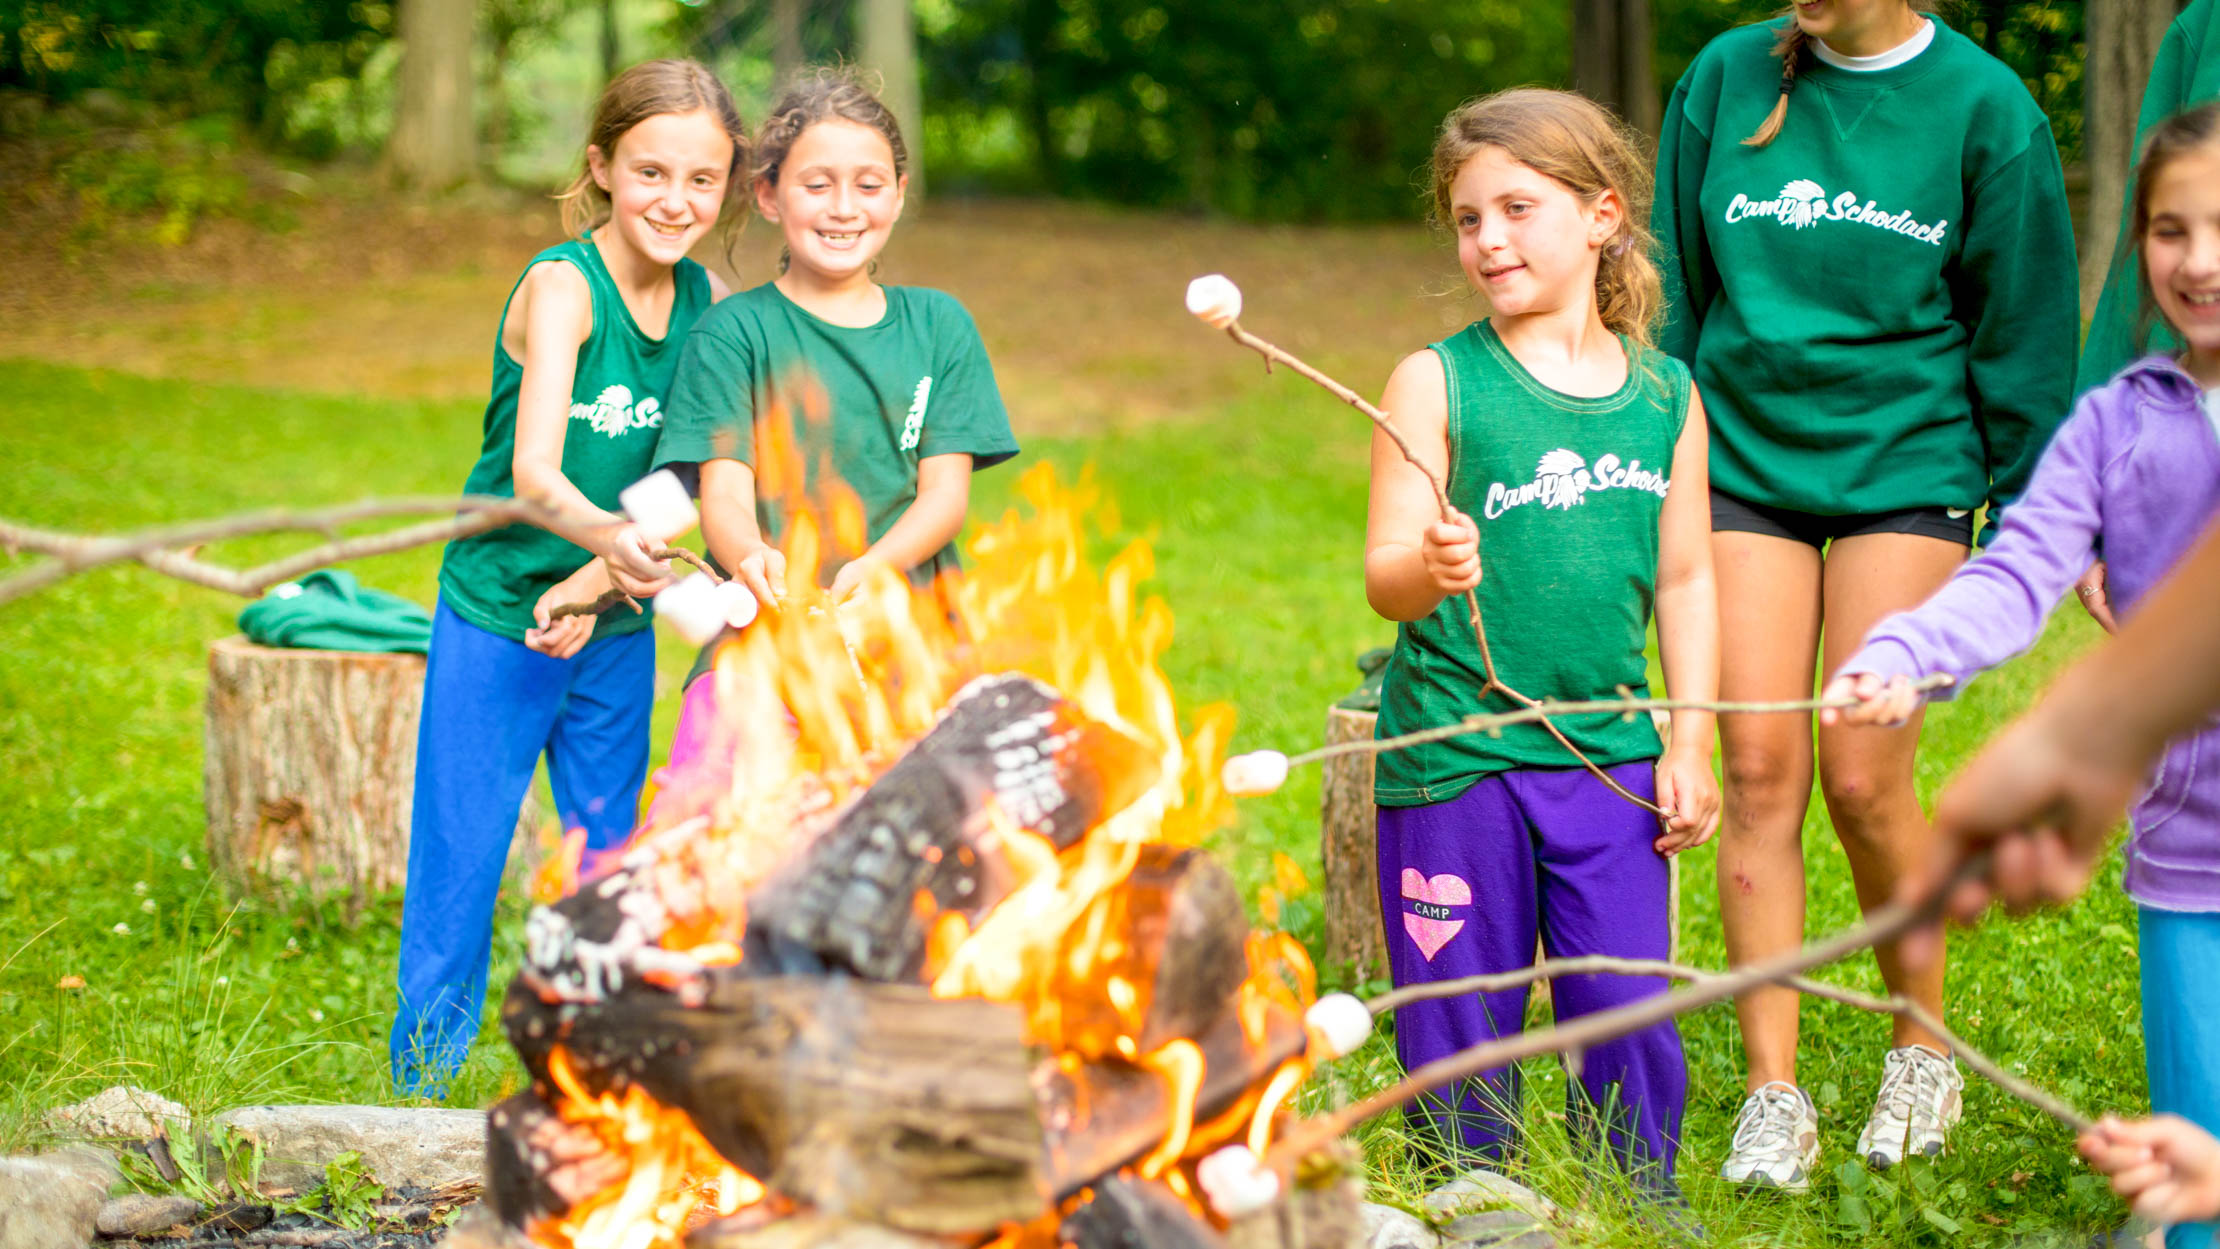 Campers roast marshmallows over an outdoor fire